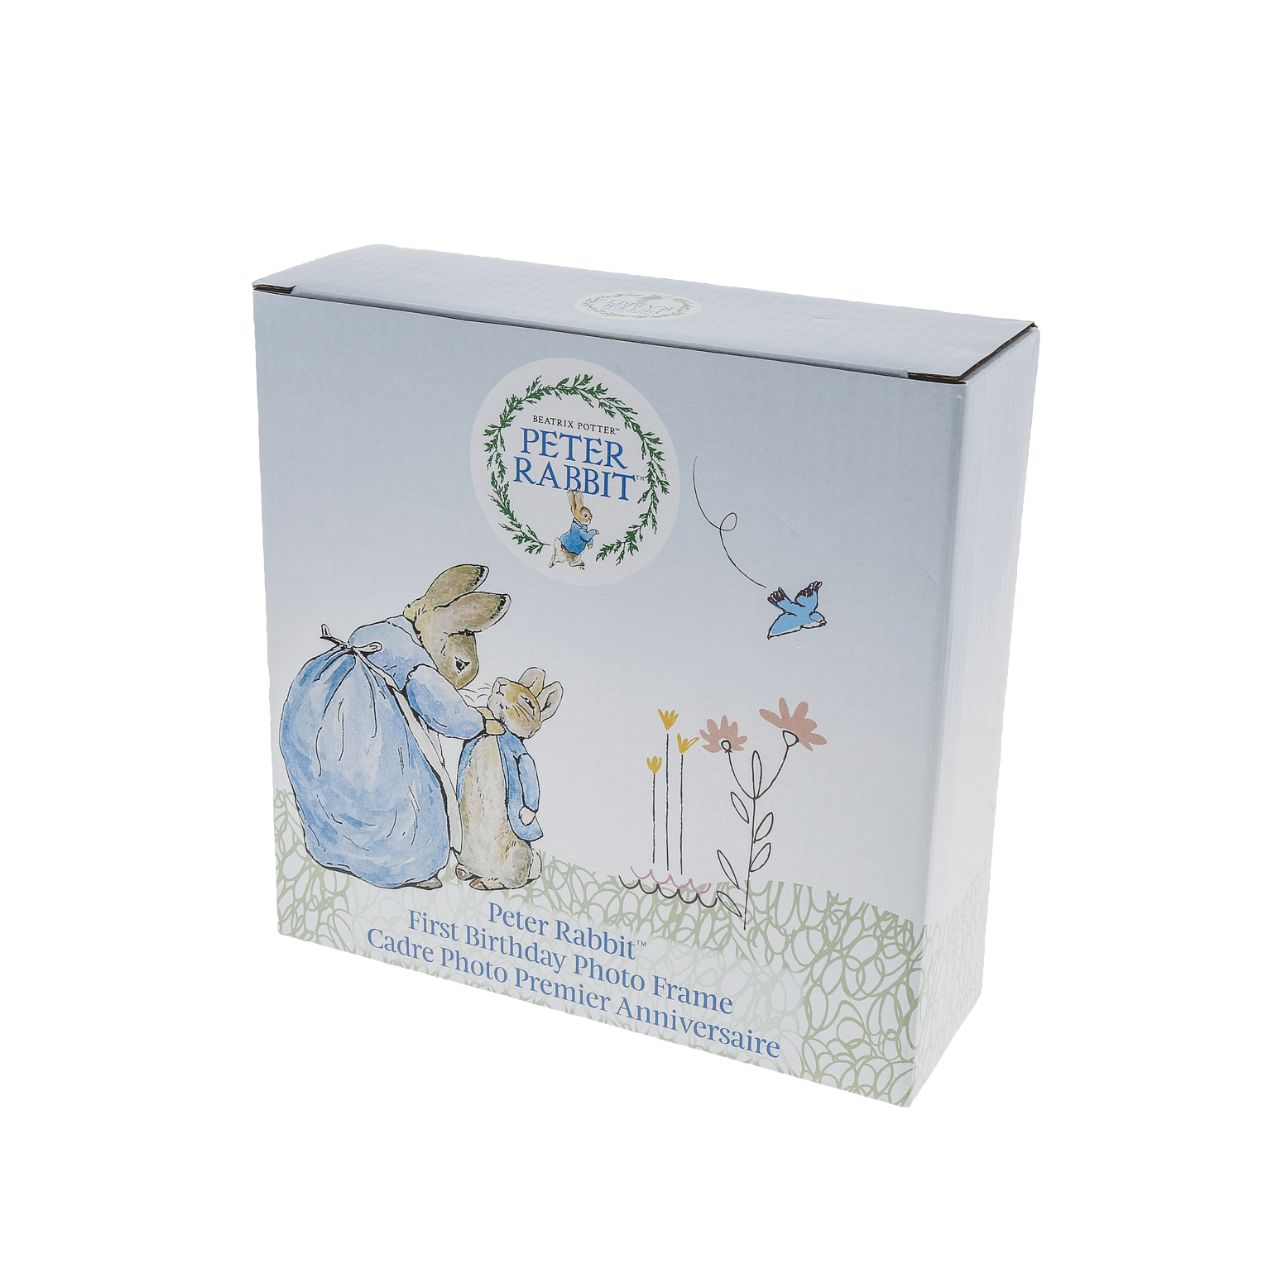 This charming Peter Rabbit My First Birthday Photo frame is the perfect place to display a picture from a birthday celebration and is sure to earn a place of honour on a tabletop or mantel. Complete with original illustrations from the Beatrix Potter stories. Photo frame fits square sized photos.